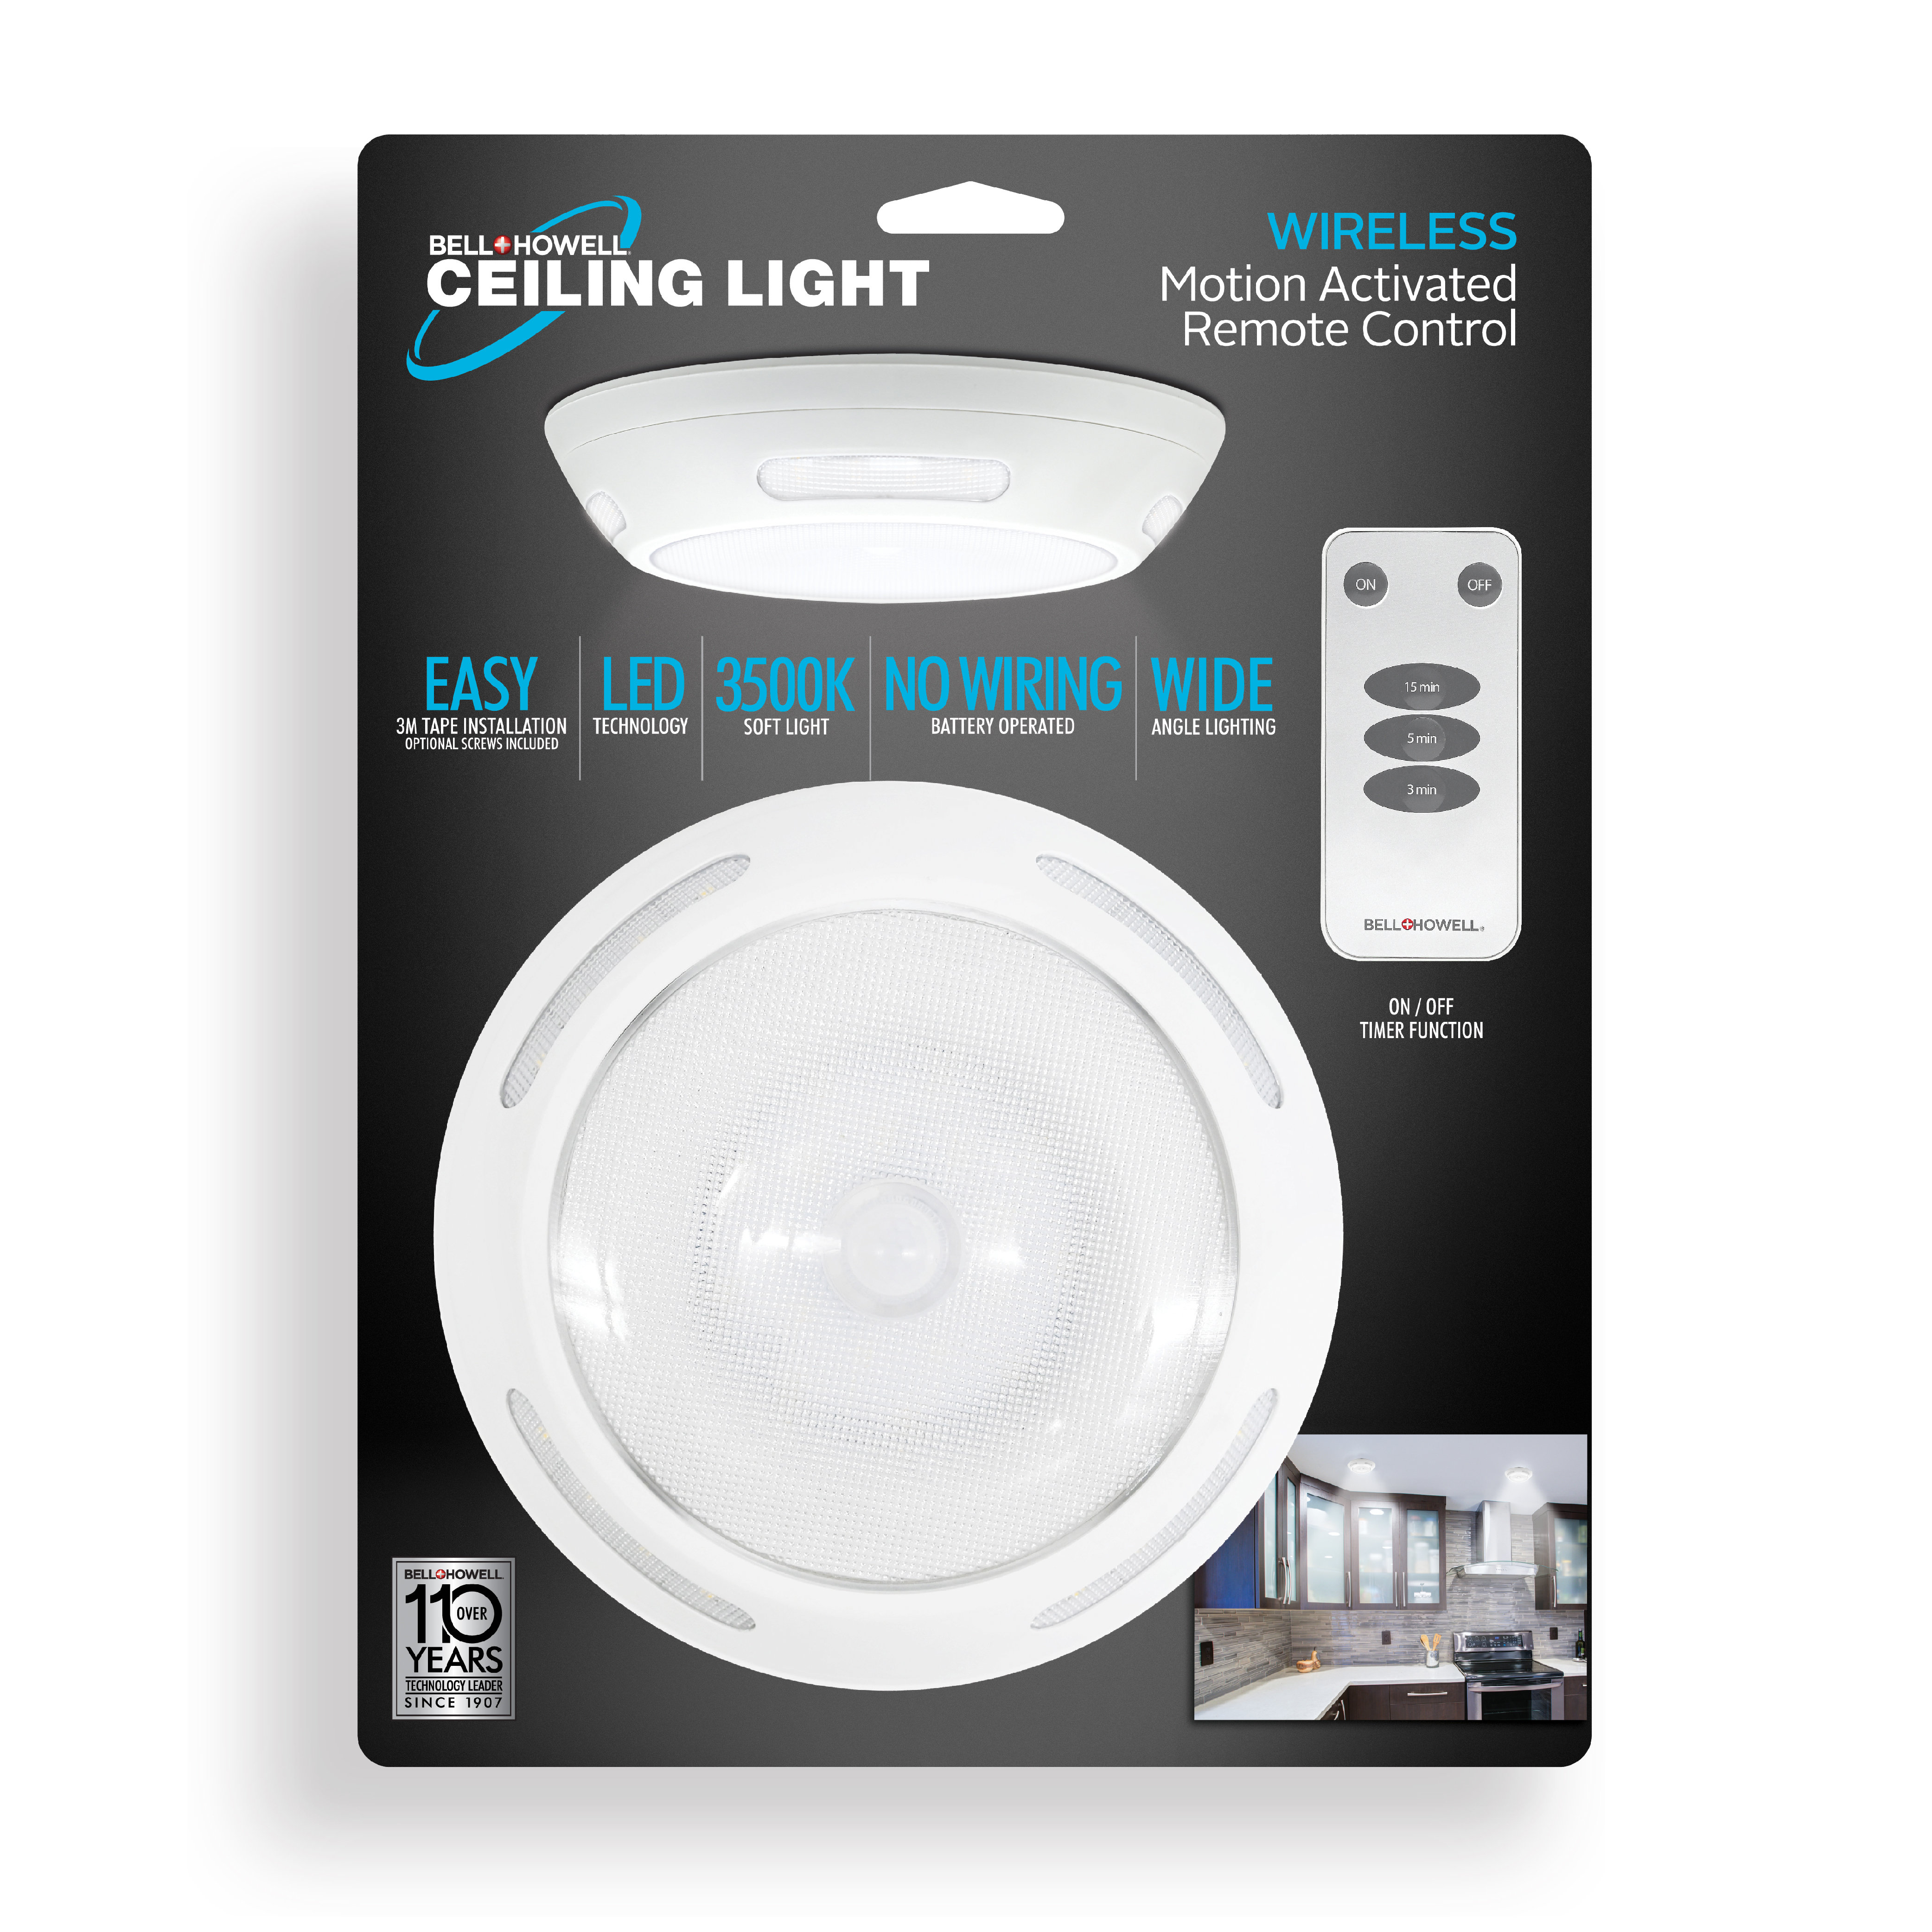 Bell 360 Wide Angle Light 3500K Soft Light 300 Lumens Remote Control Timer & Motion Functions Includes 3M Tape Howell Wireless Ceiling Spotlight LED Ceiling Light Fixture Instant Installation 